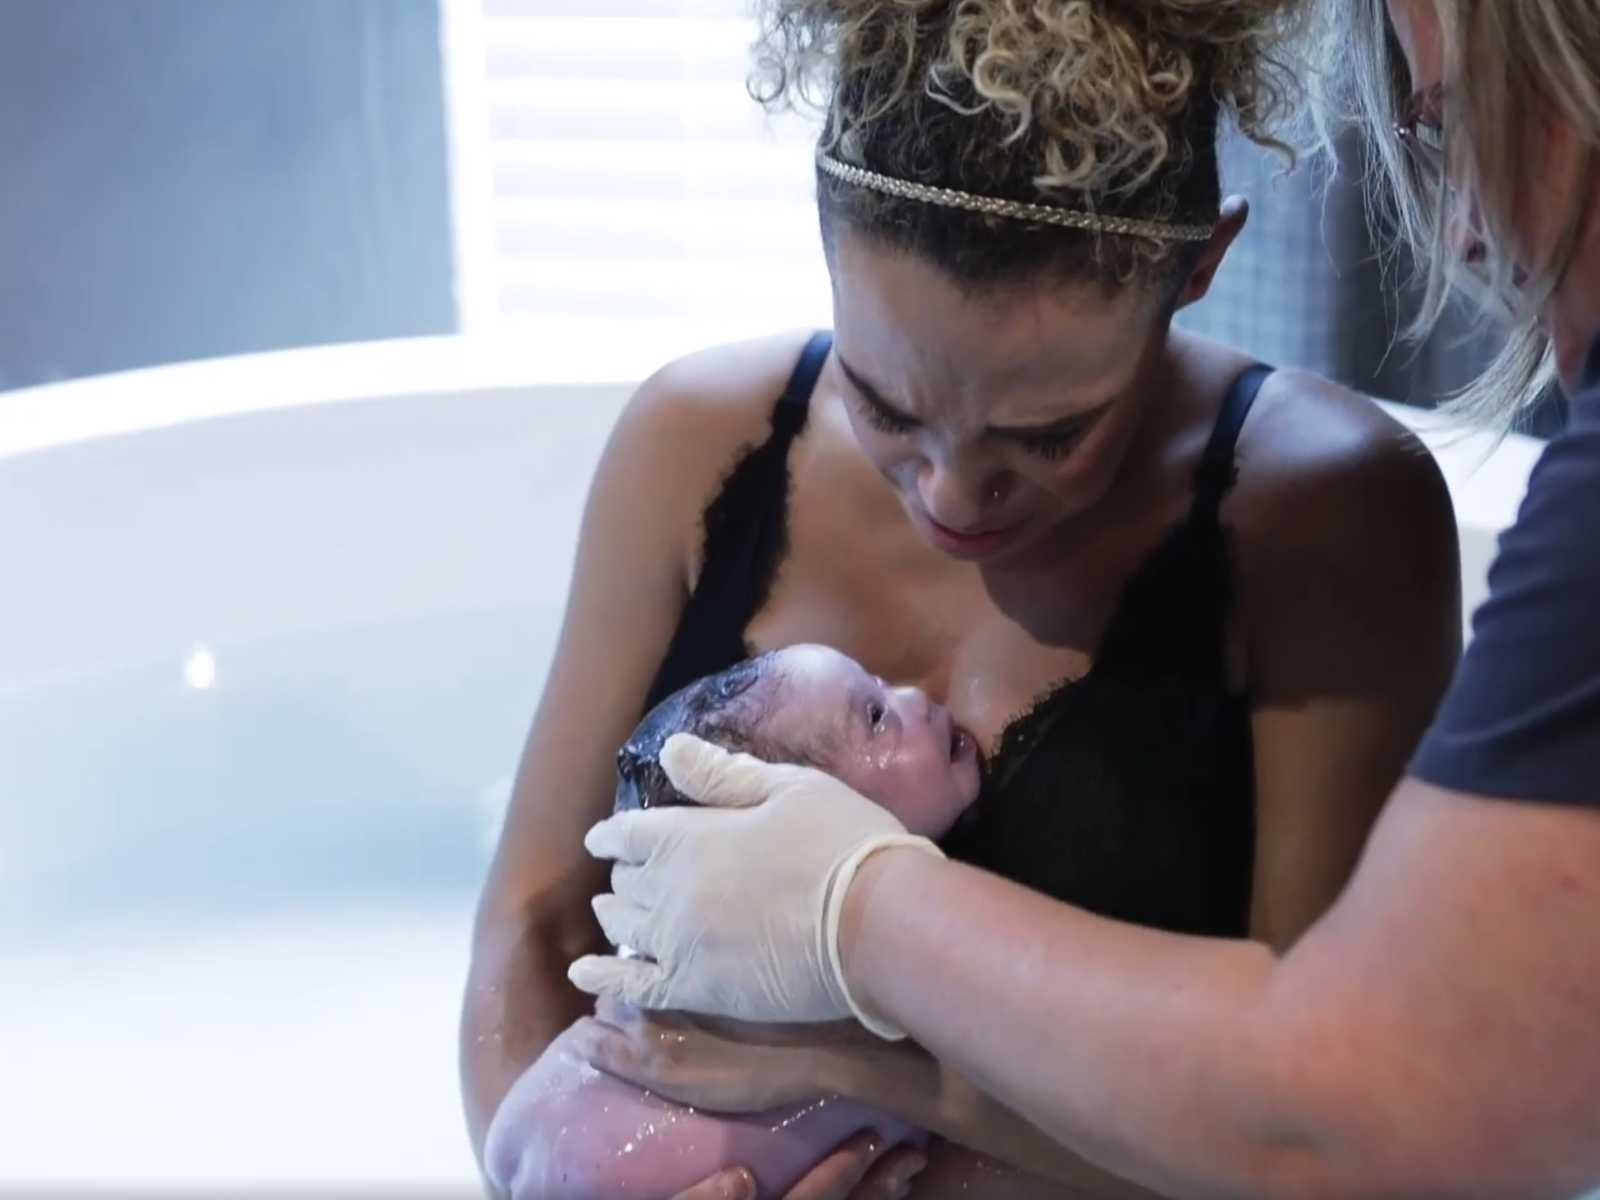 mother looking down at wet newborn next to woman who has hand in white latex glove placed on newborns head